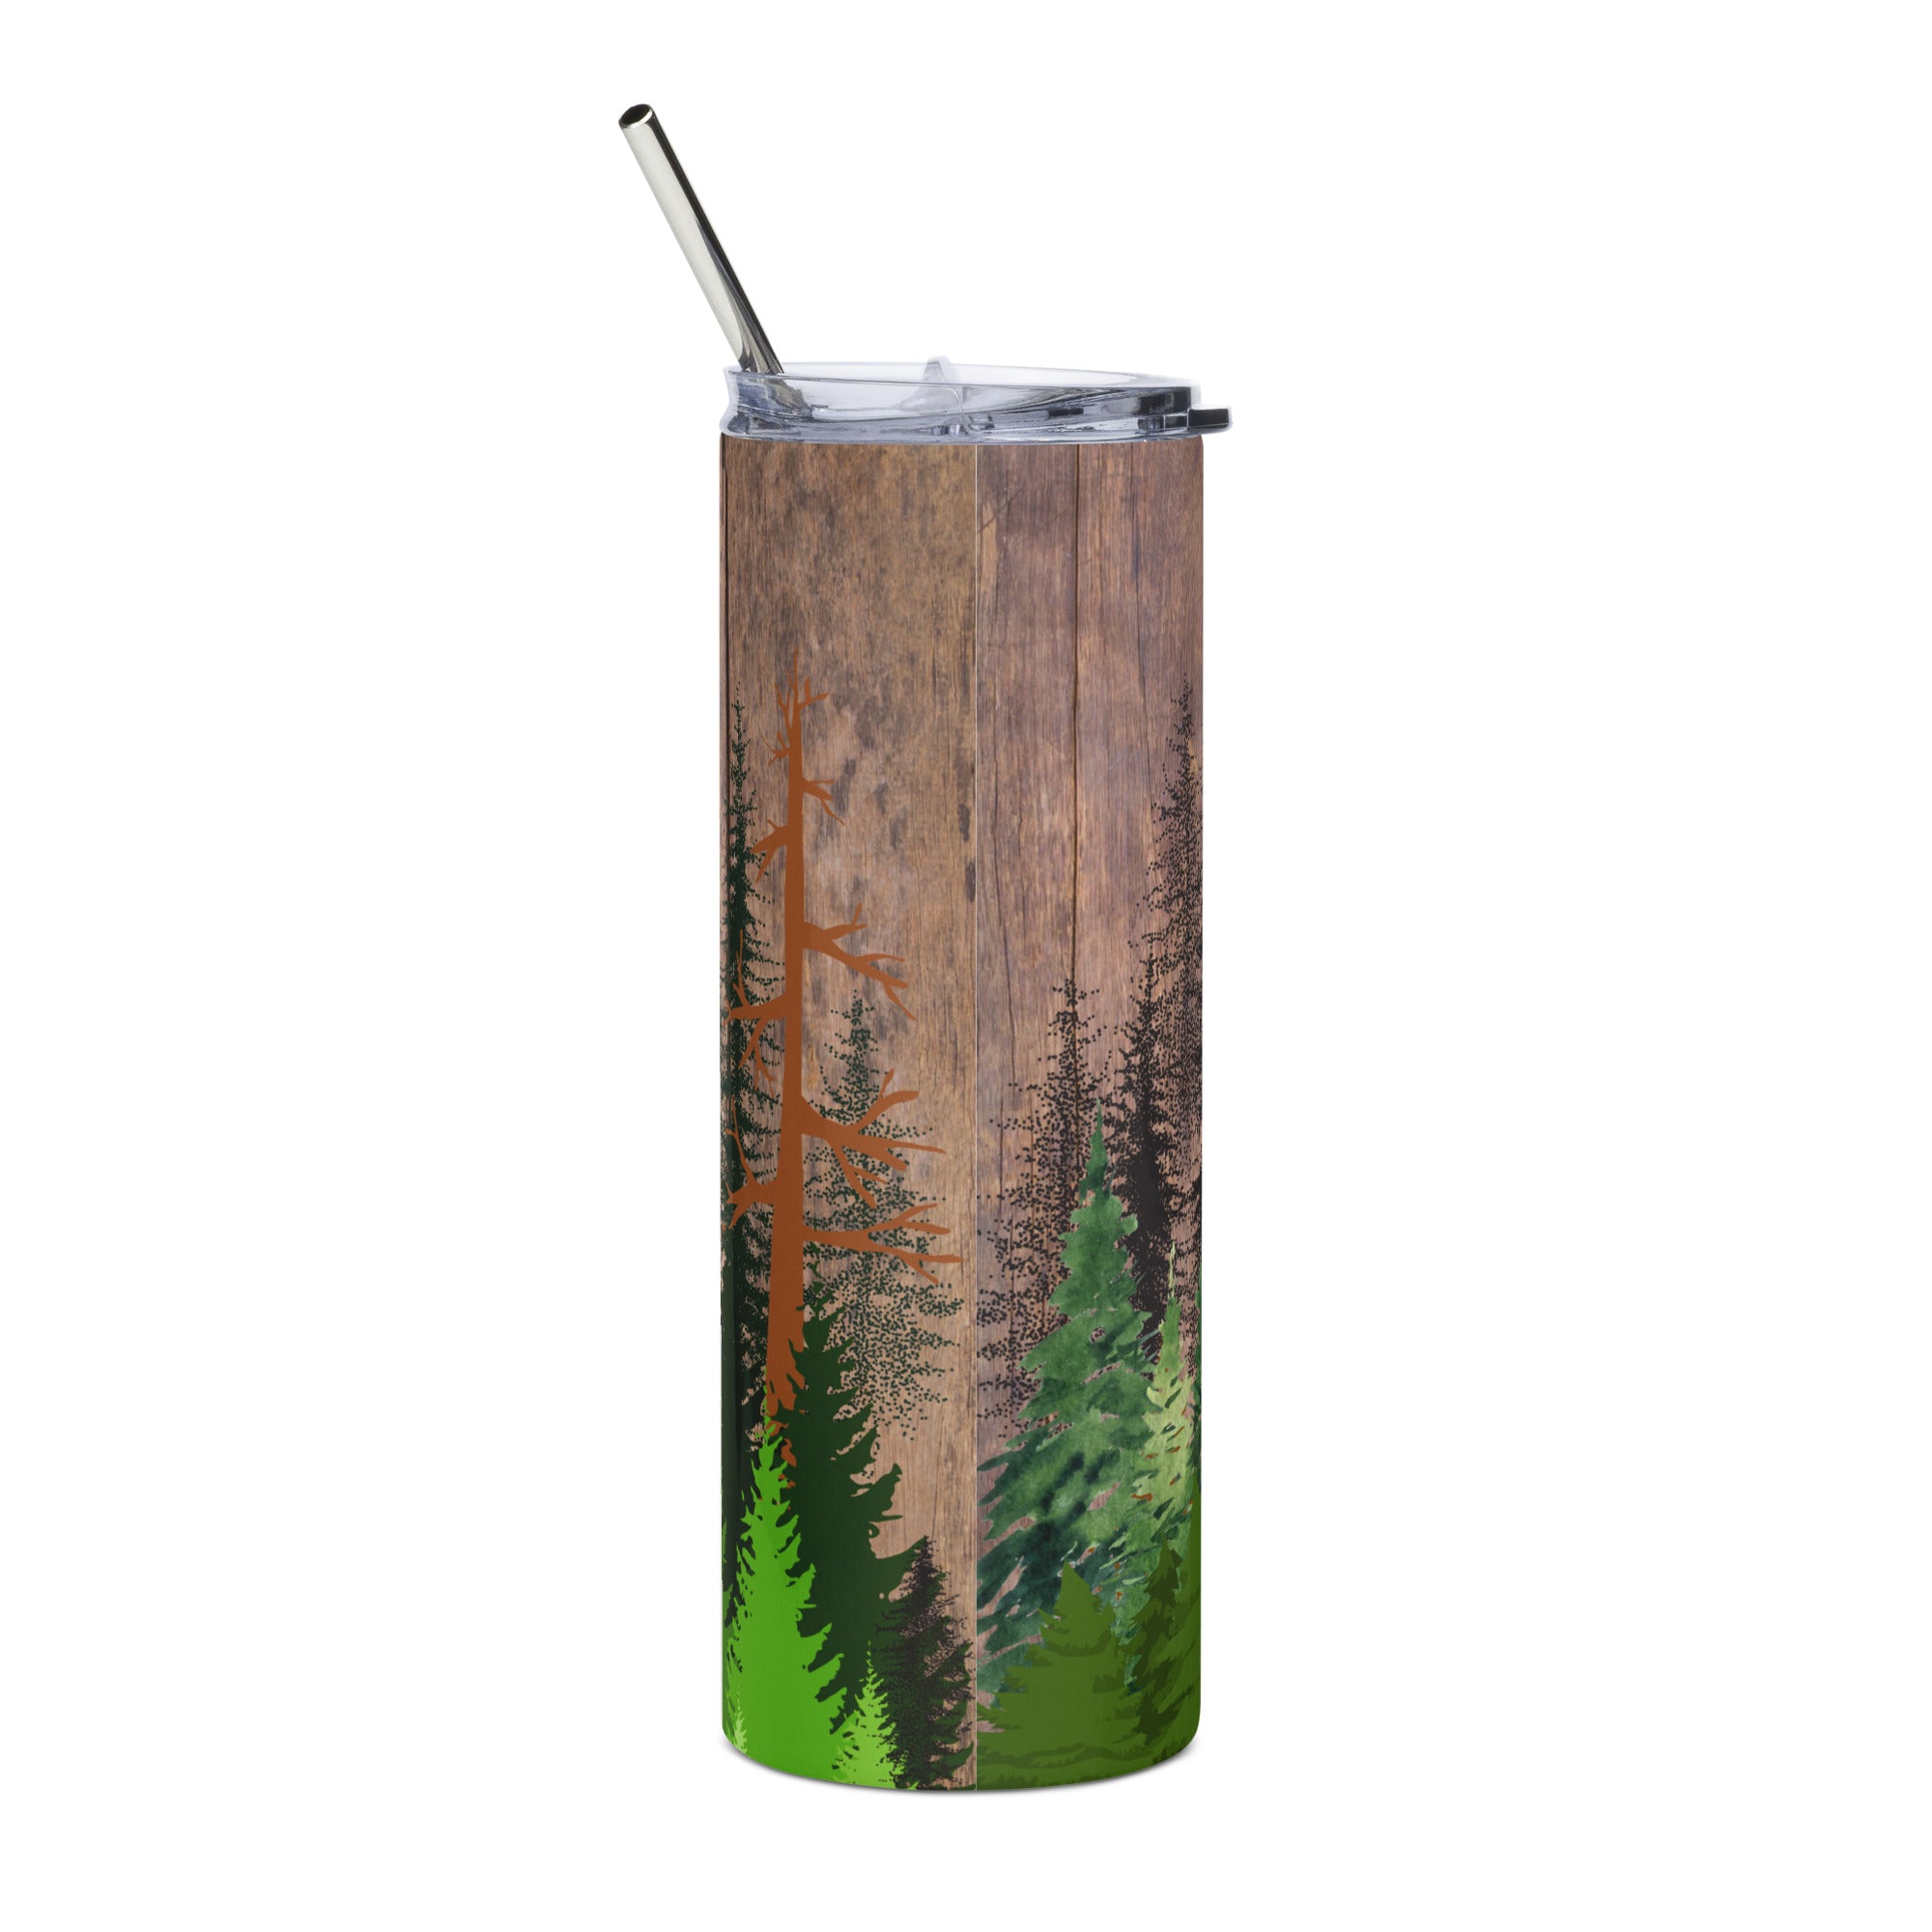 Life is Better in the Woods - Stainless Steel Tumbler